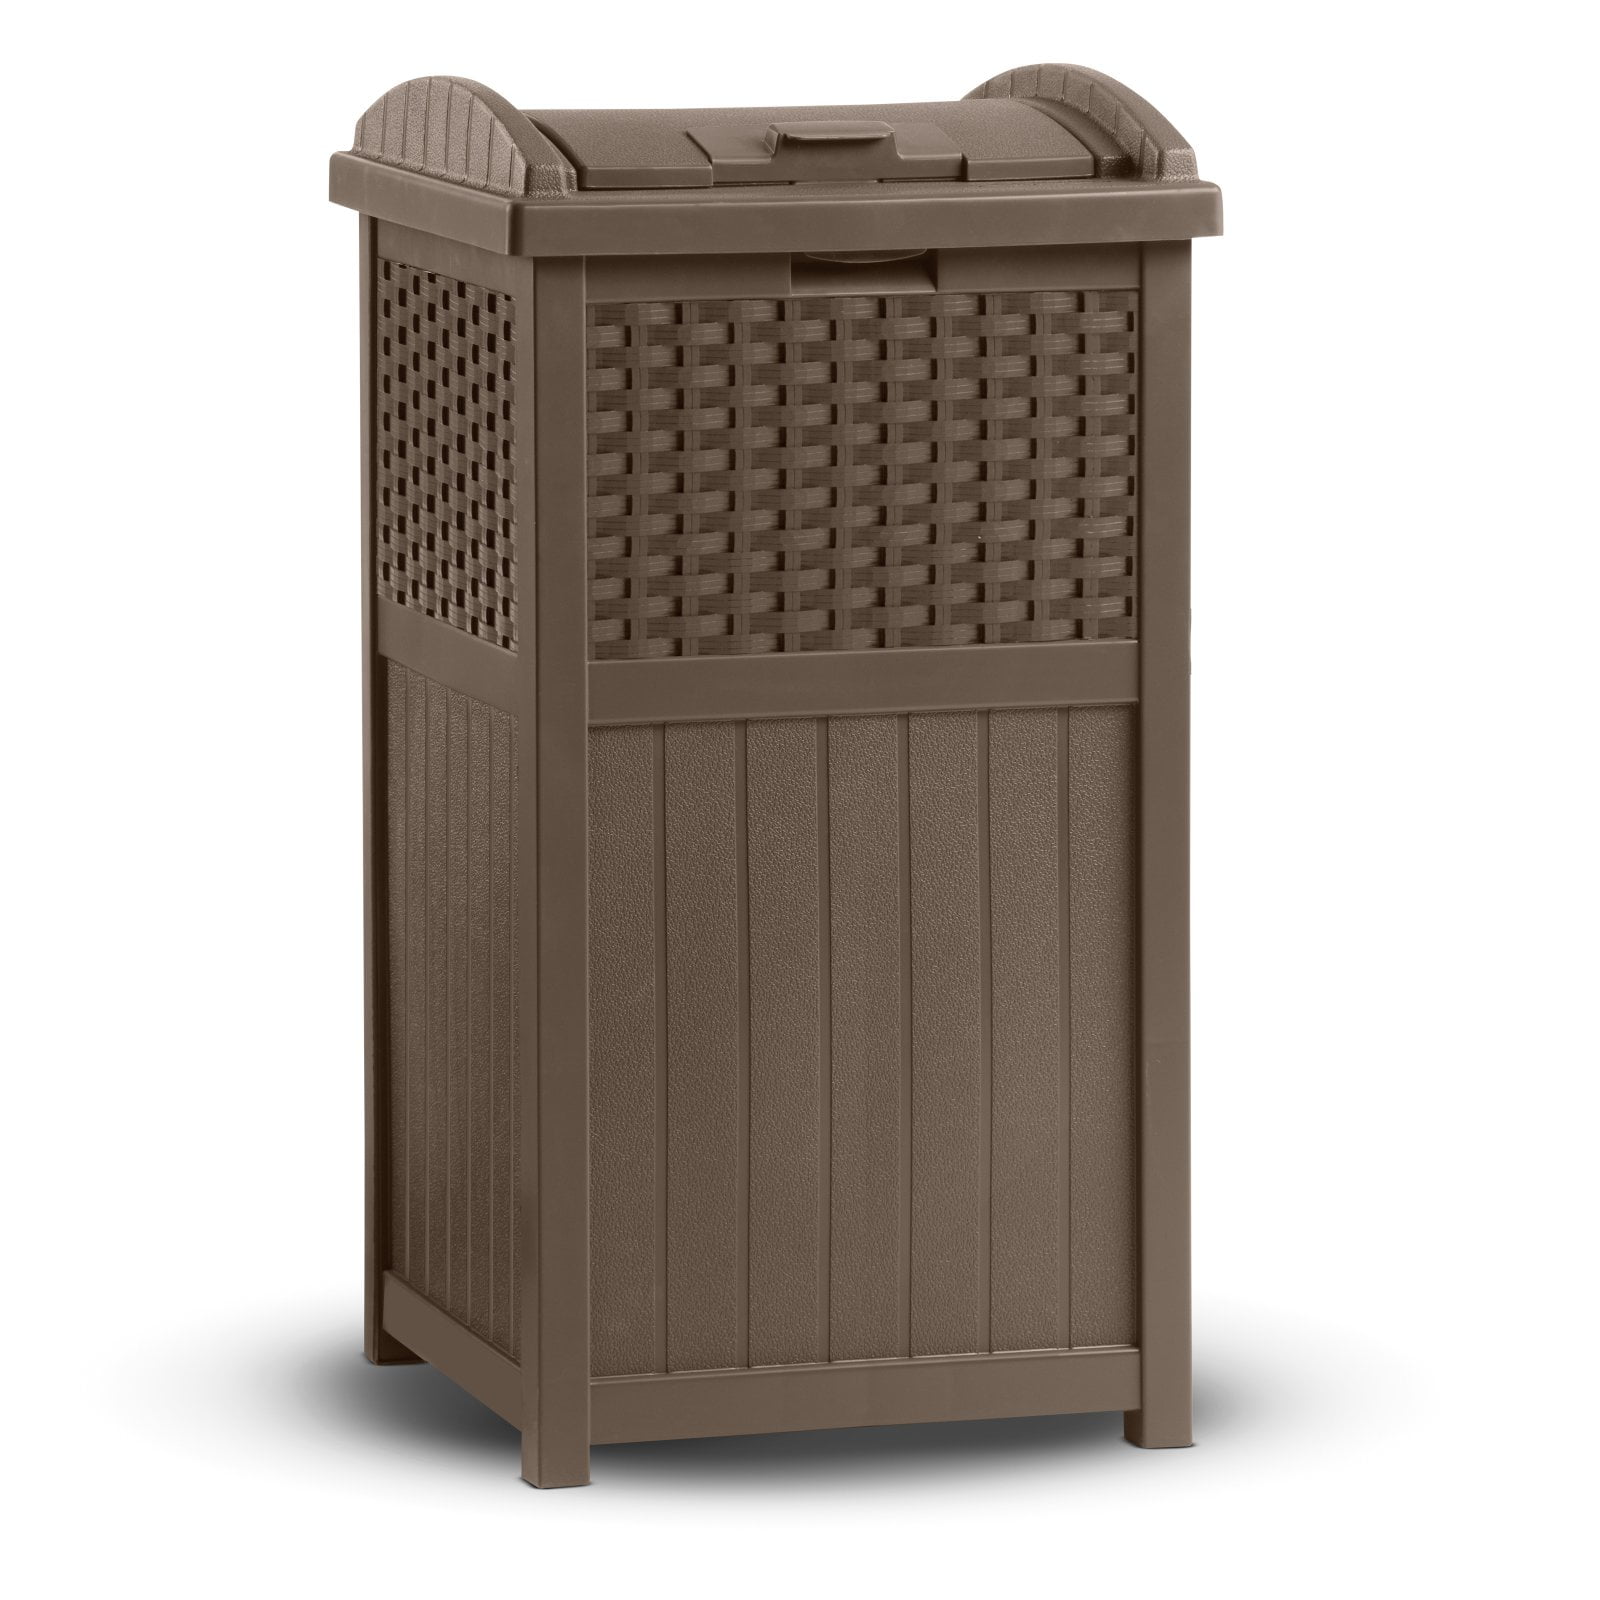 33 Gallon Outdoor Trash Can for Patio Resin Outdoor Trash Hideaway wit 